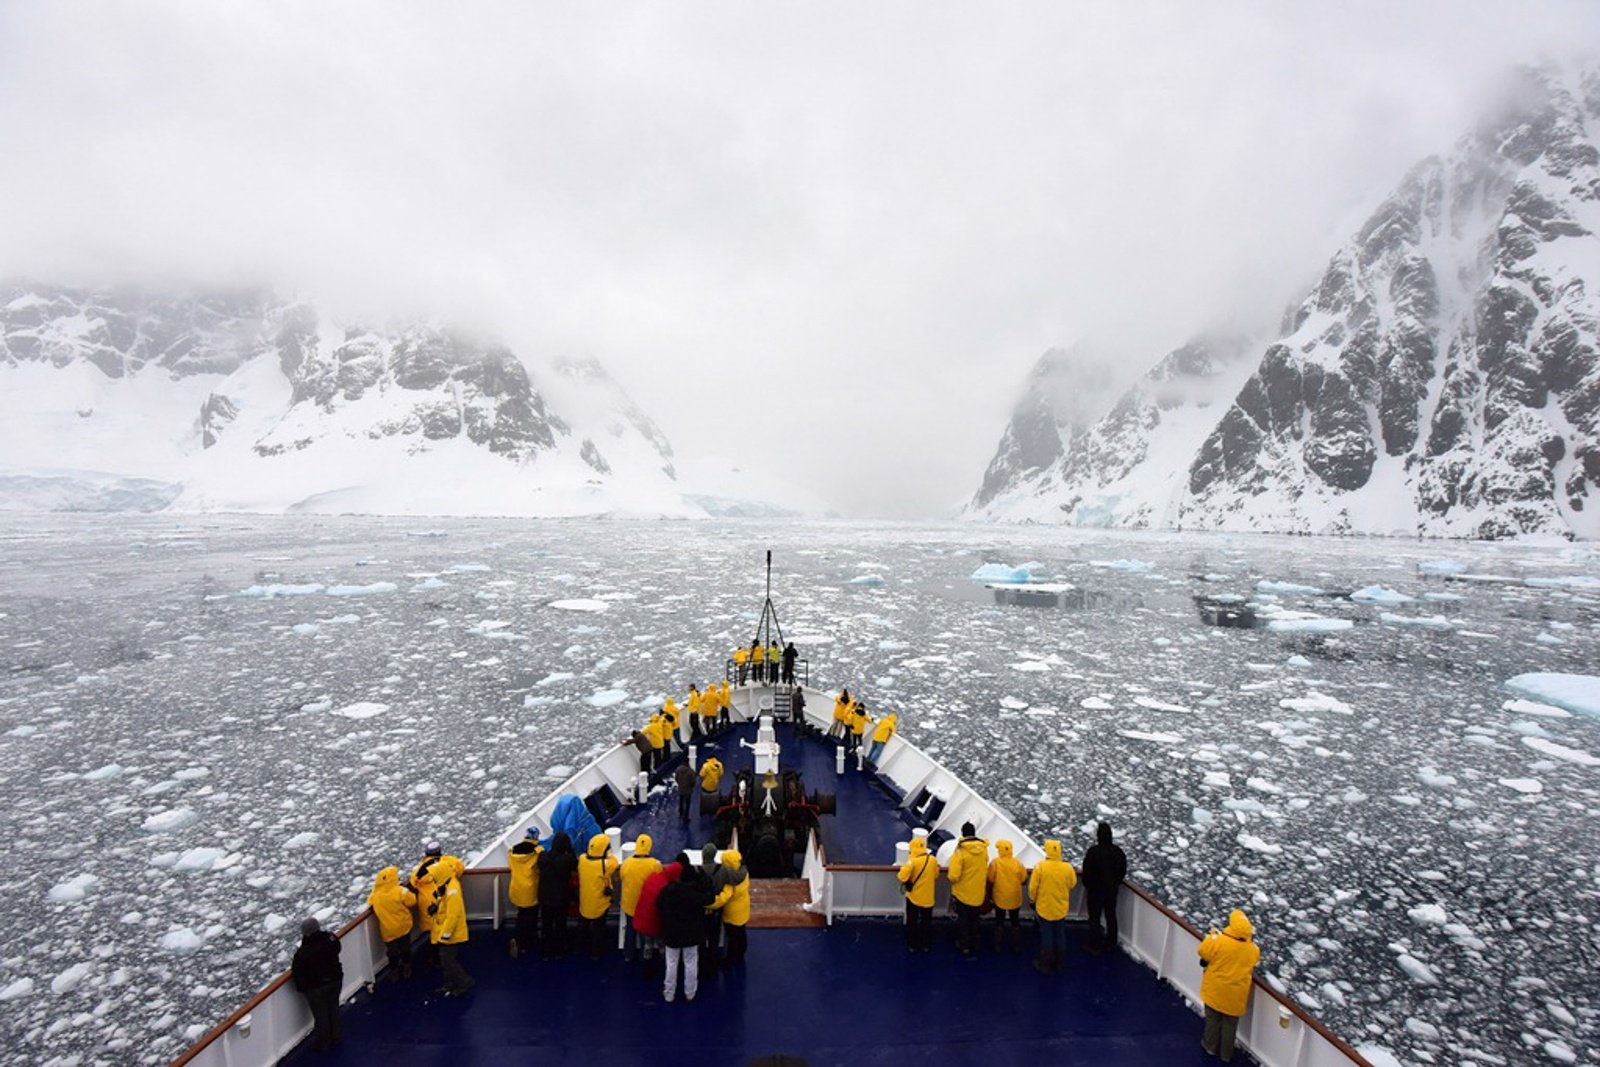 Passengers gather on deck to appreciate the icy waters of the Lemaire Channel on an Antarctic expedition.